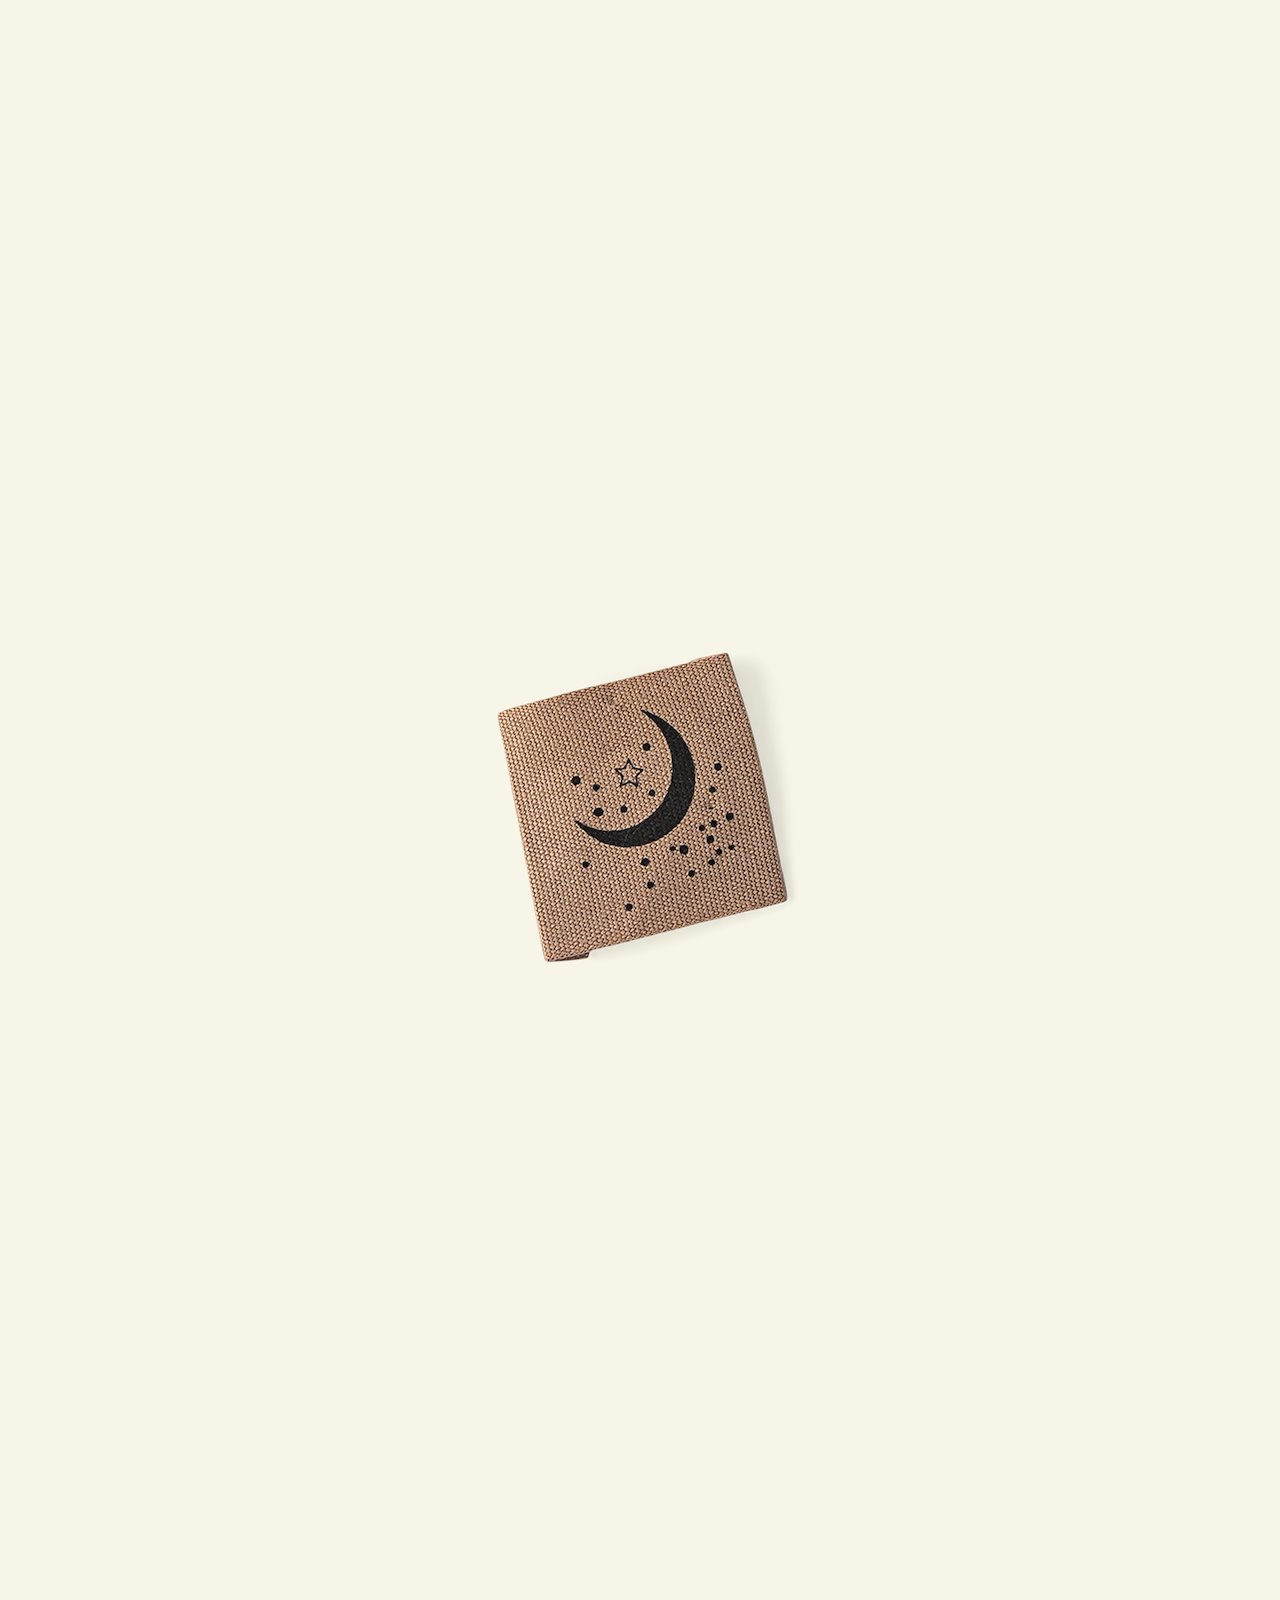 Patch moon 30x30mm caramel 1pc 24877_pack